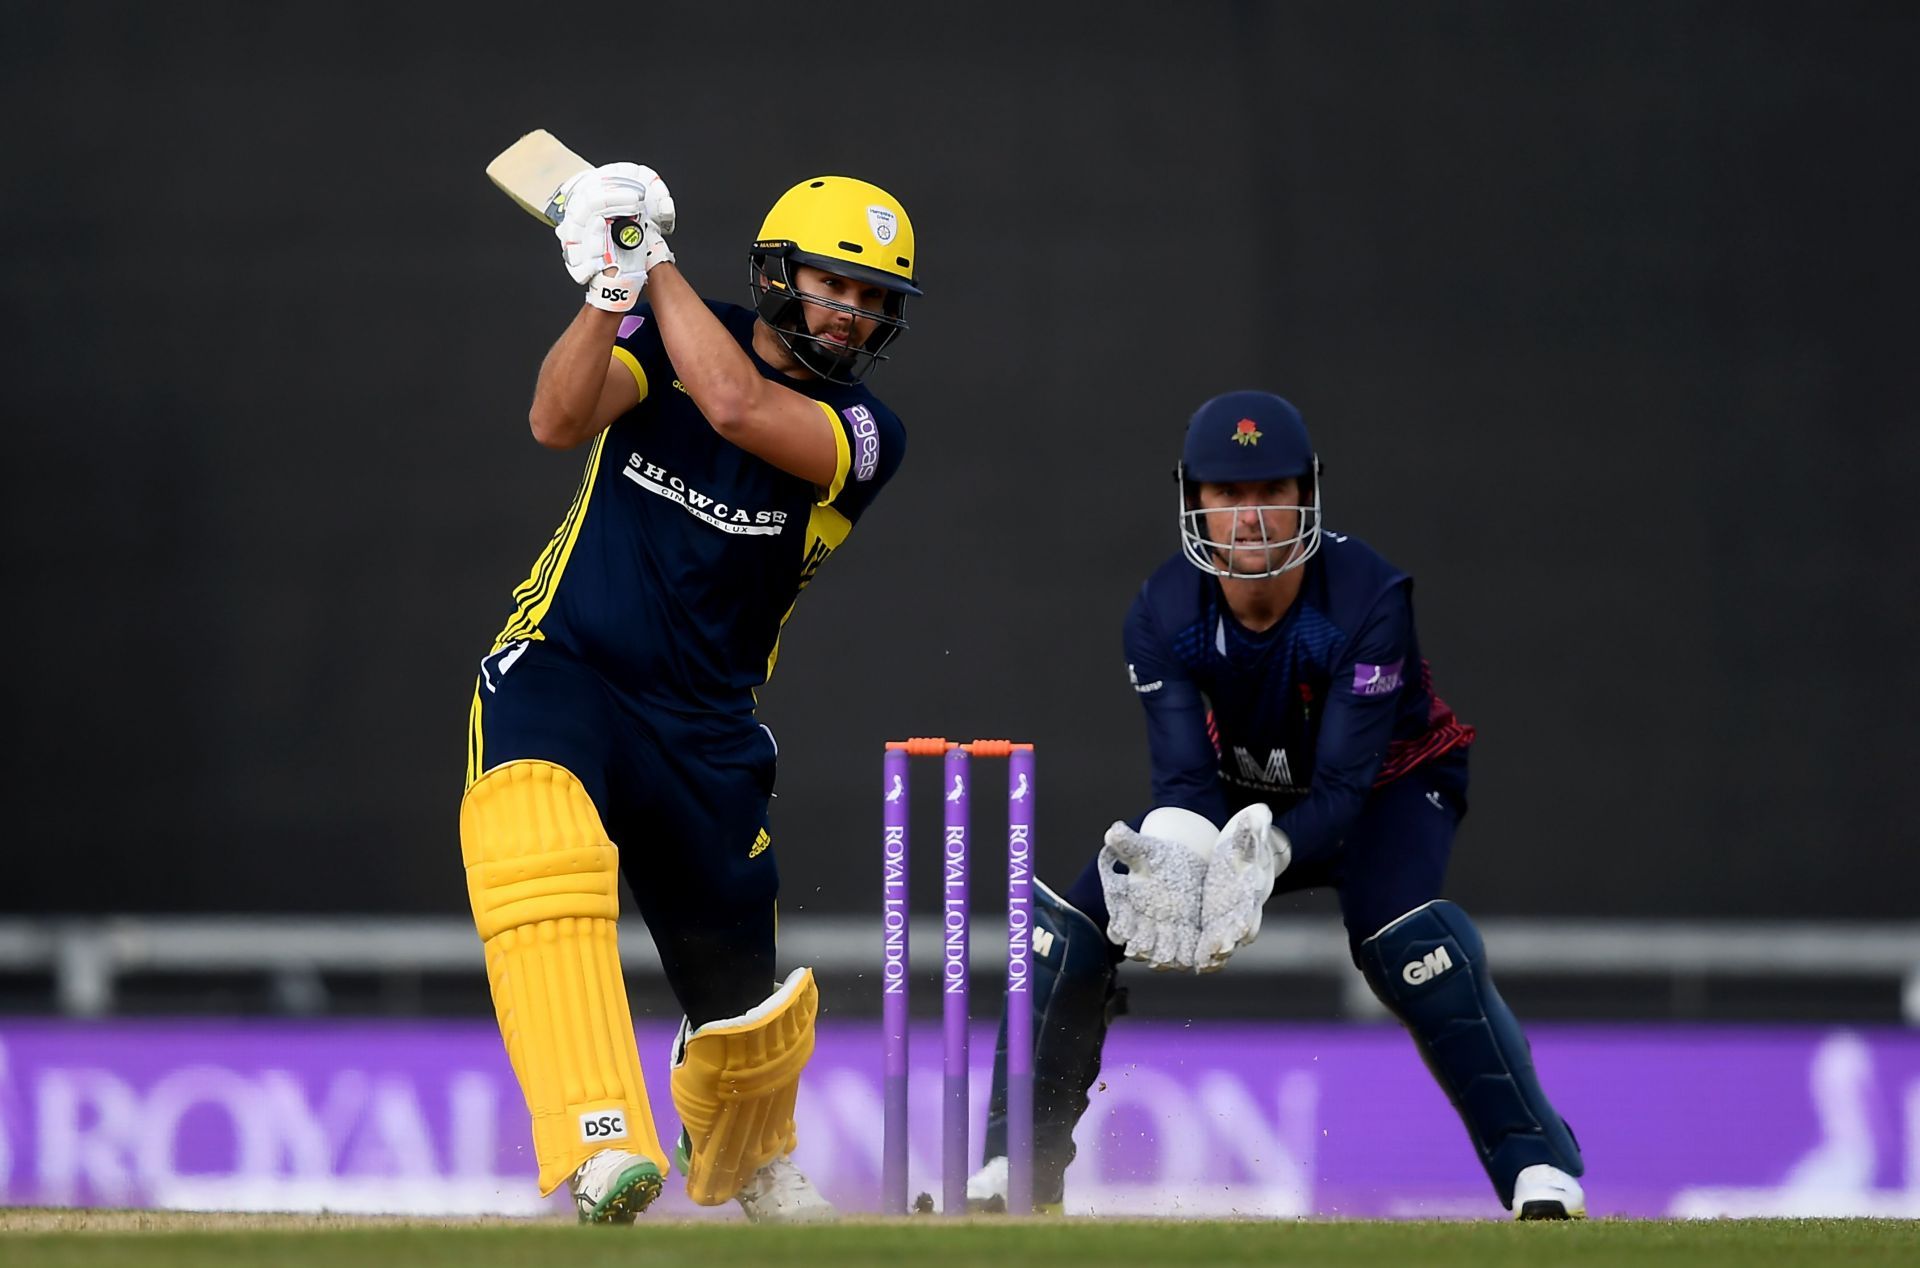 &lt;a href=&#039;https://www.sportskeeda.com/player/rilee-rossouw&#039; target=&#039;_blank&#039; rel=&#039;noopener noreferrer&#039;&gt;&lt;a href=&#039;https://www.sportskeeda.com/player/rilee-rossouw&#039; target=&#039;_blank&#039; rel=&#039;noopener noreferrer&#039;&gt;&lt;a href=&#039;https://www.sportskeeda.com/player/rilee-rossouw&#039; target=&#039;_blank&#039; rel=&#039;noopener noreferrer&#039;&gt;Rilee Rossouw&lt;/a&gt;&lt;/a&gt;&lt;/a&gt; playes a shot during the Royal London One Day Cup.